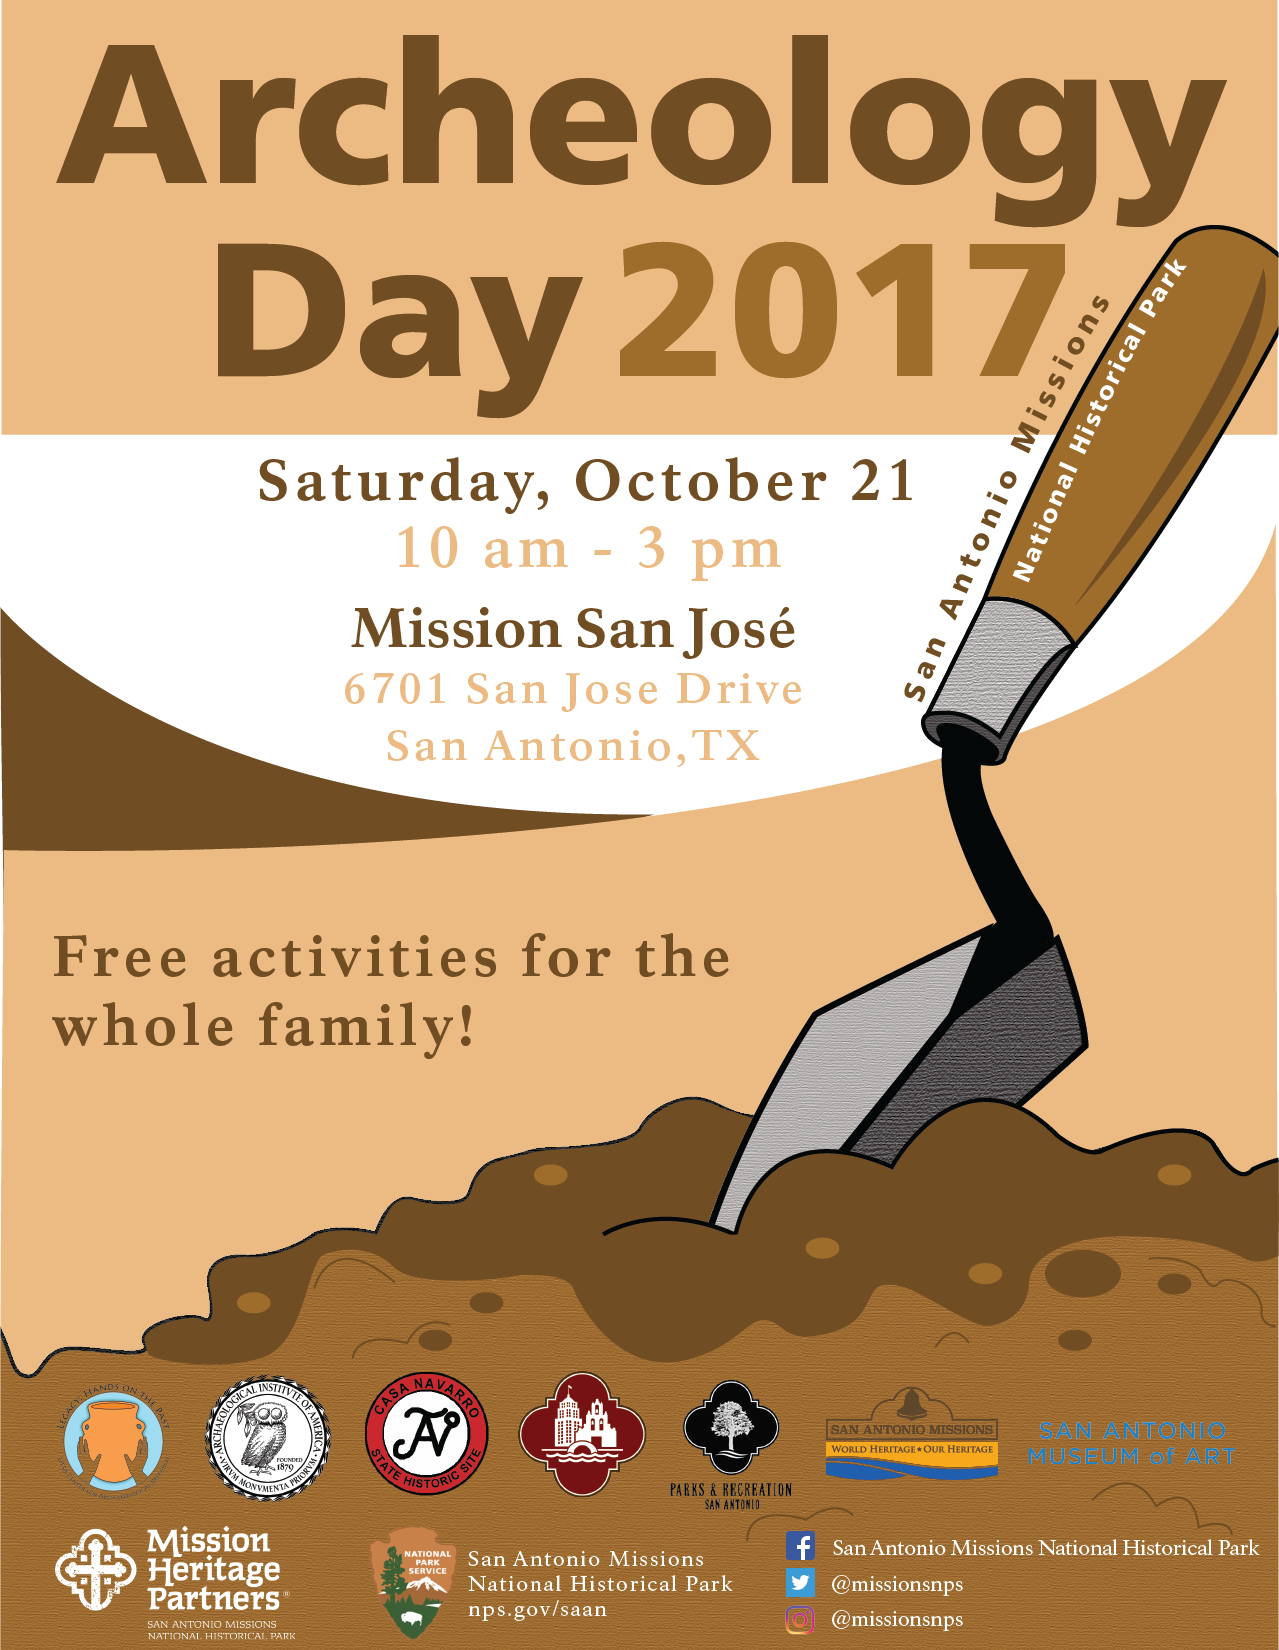 Archeology day Poster 2017